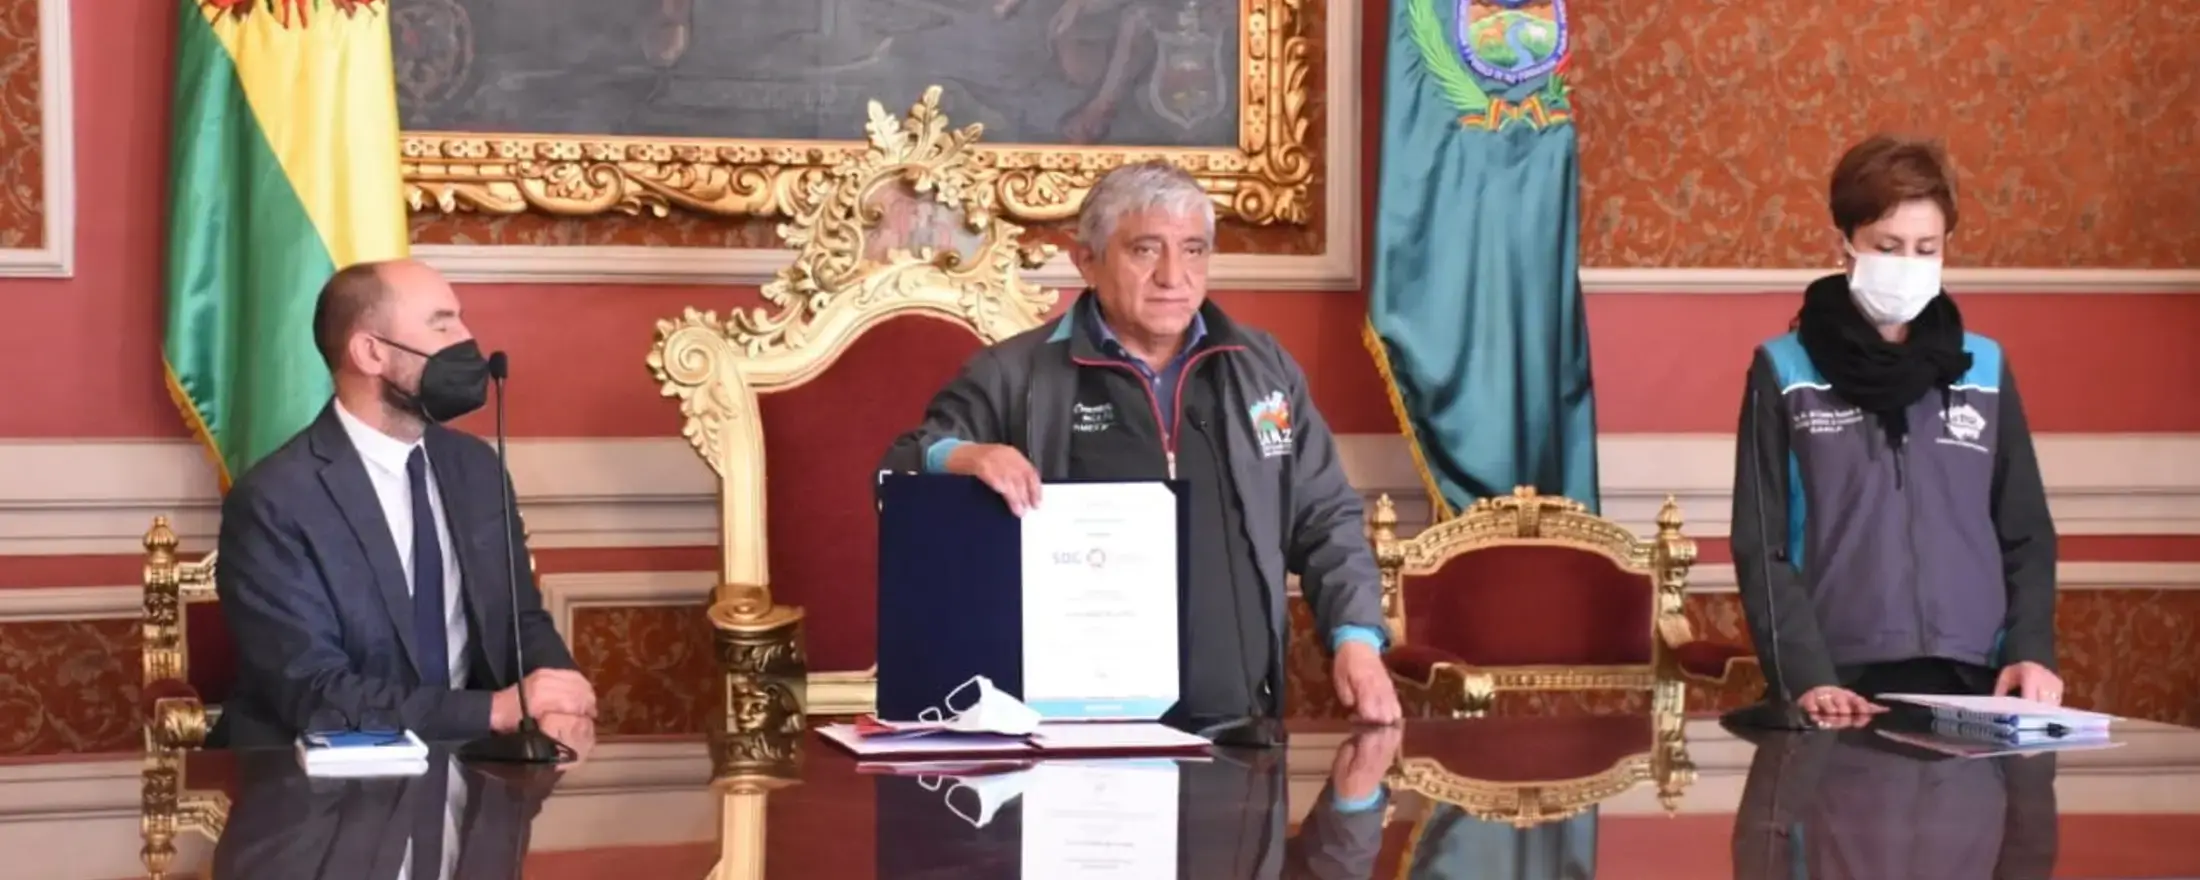 La Paz, the first city in Latin America and the Caribbean to receive Silver Certification